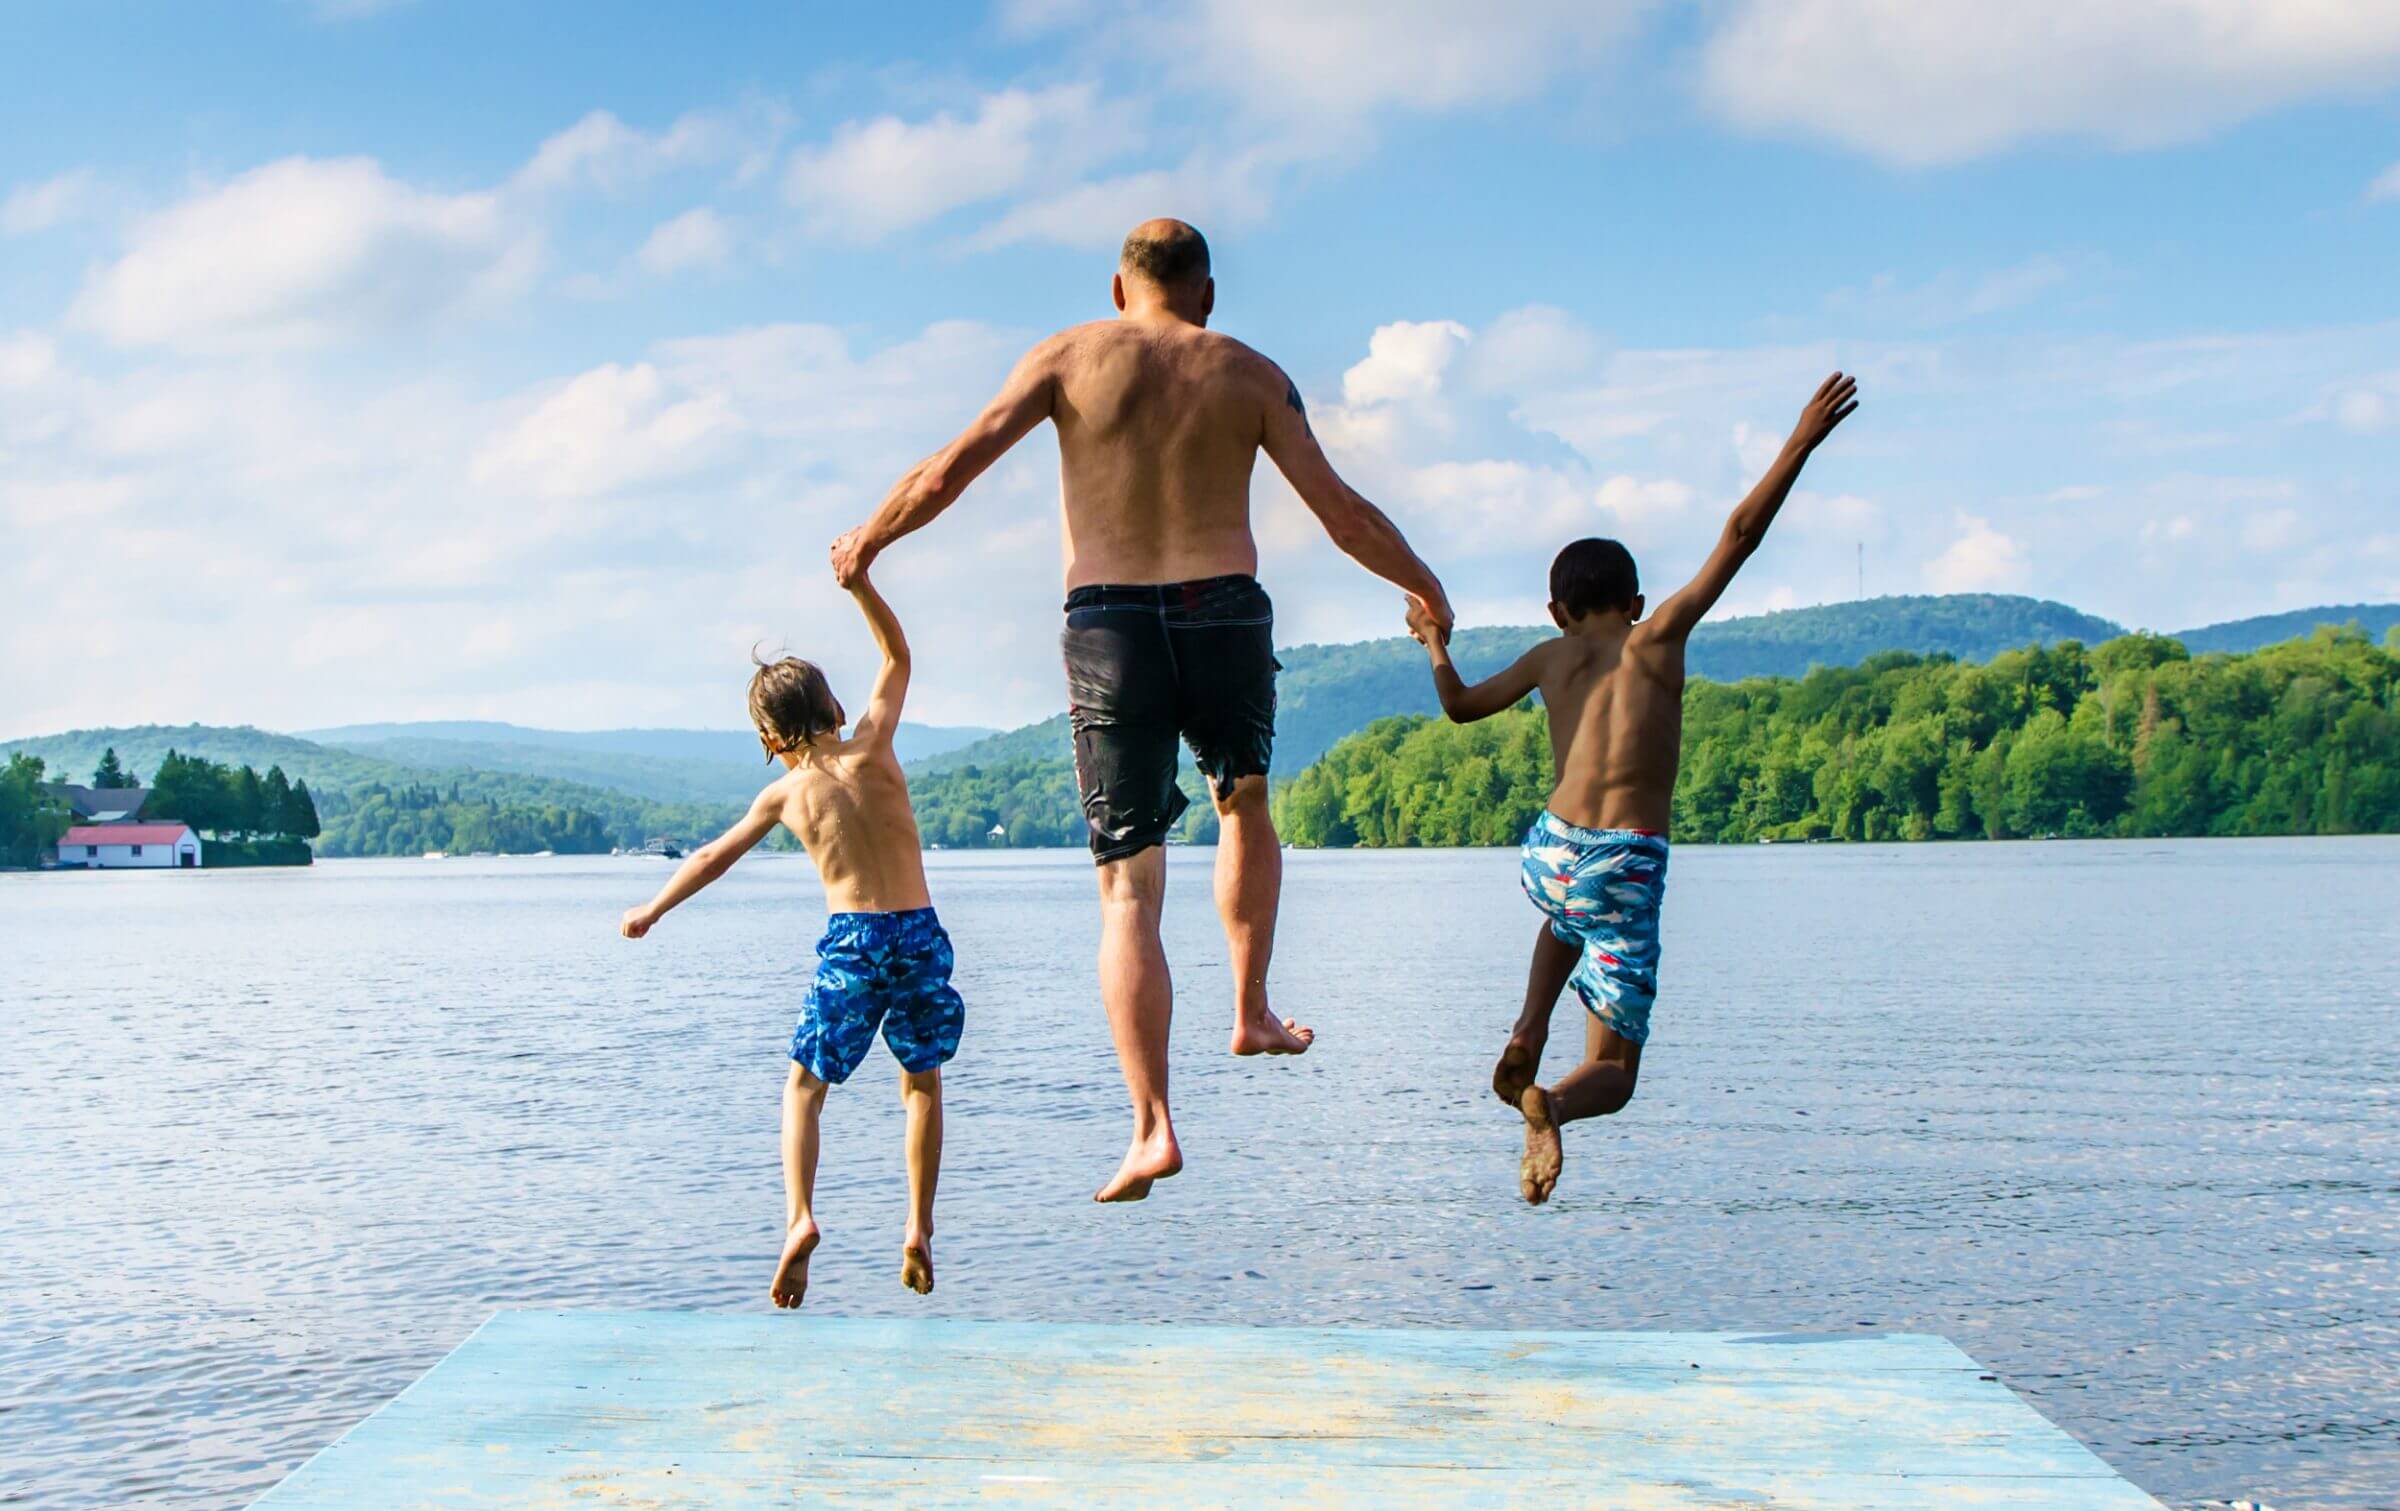 Photo from behind of a grandfather jumping off a dock into a lack with grandchildren at either side, arms raised in mid air.